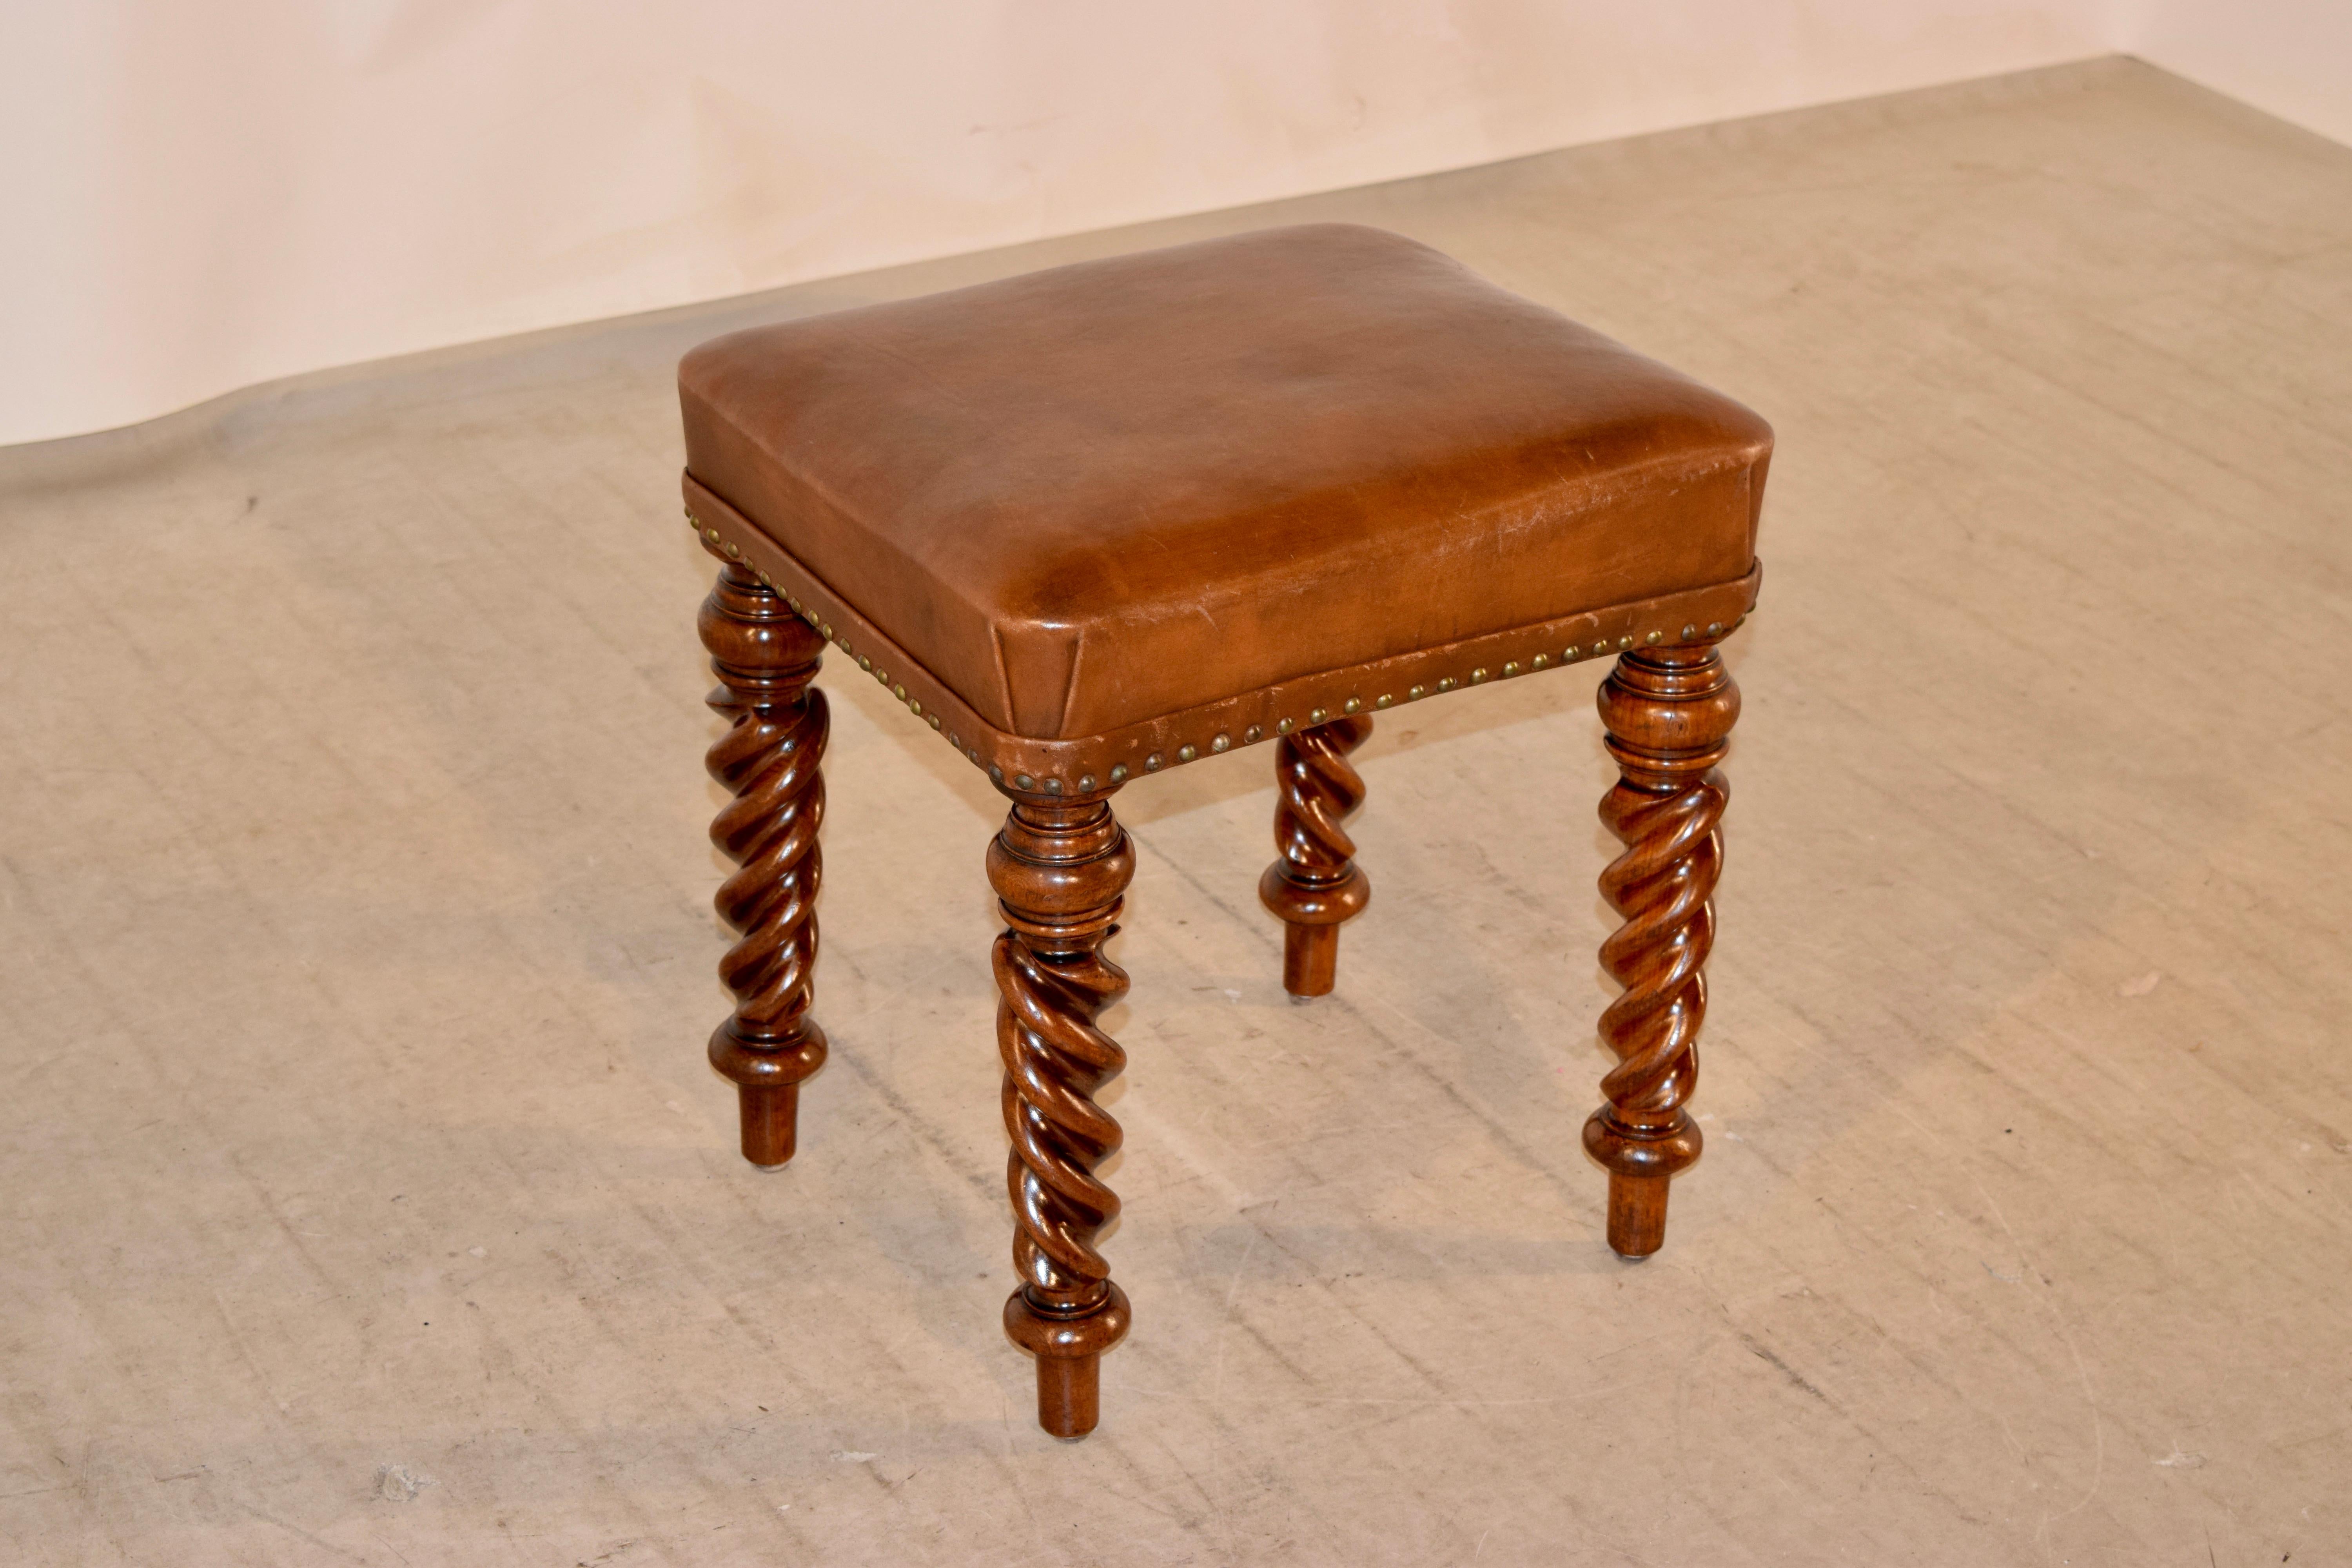 19th century English stool made from mahogany with a leather upholstered seat, which has brass nail decoration around the base of the seat. The legs are hand-turned and are a wonderful flame twist shape.